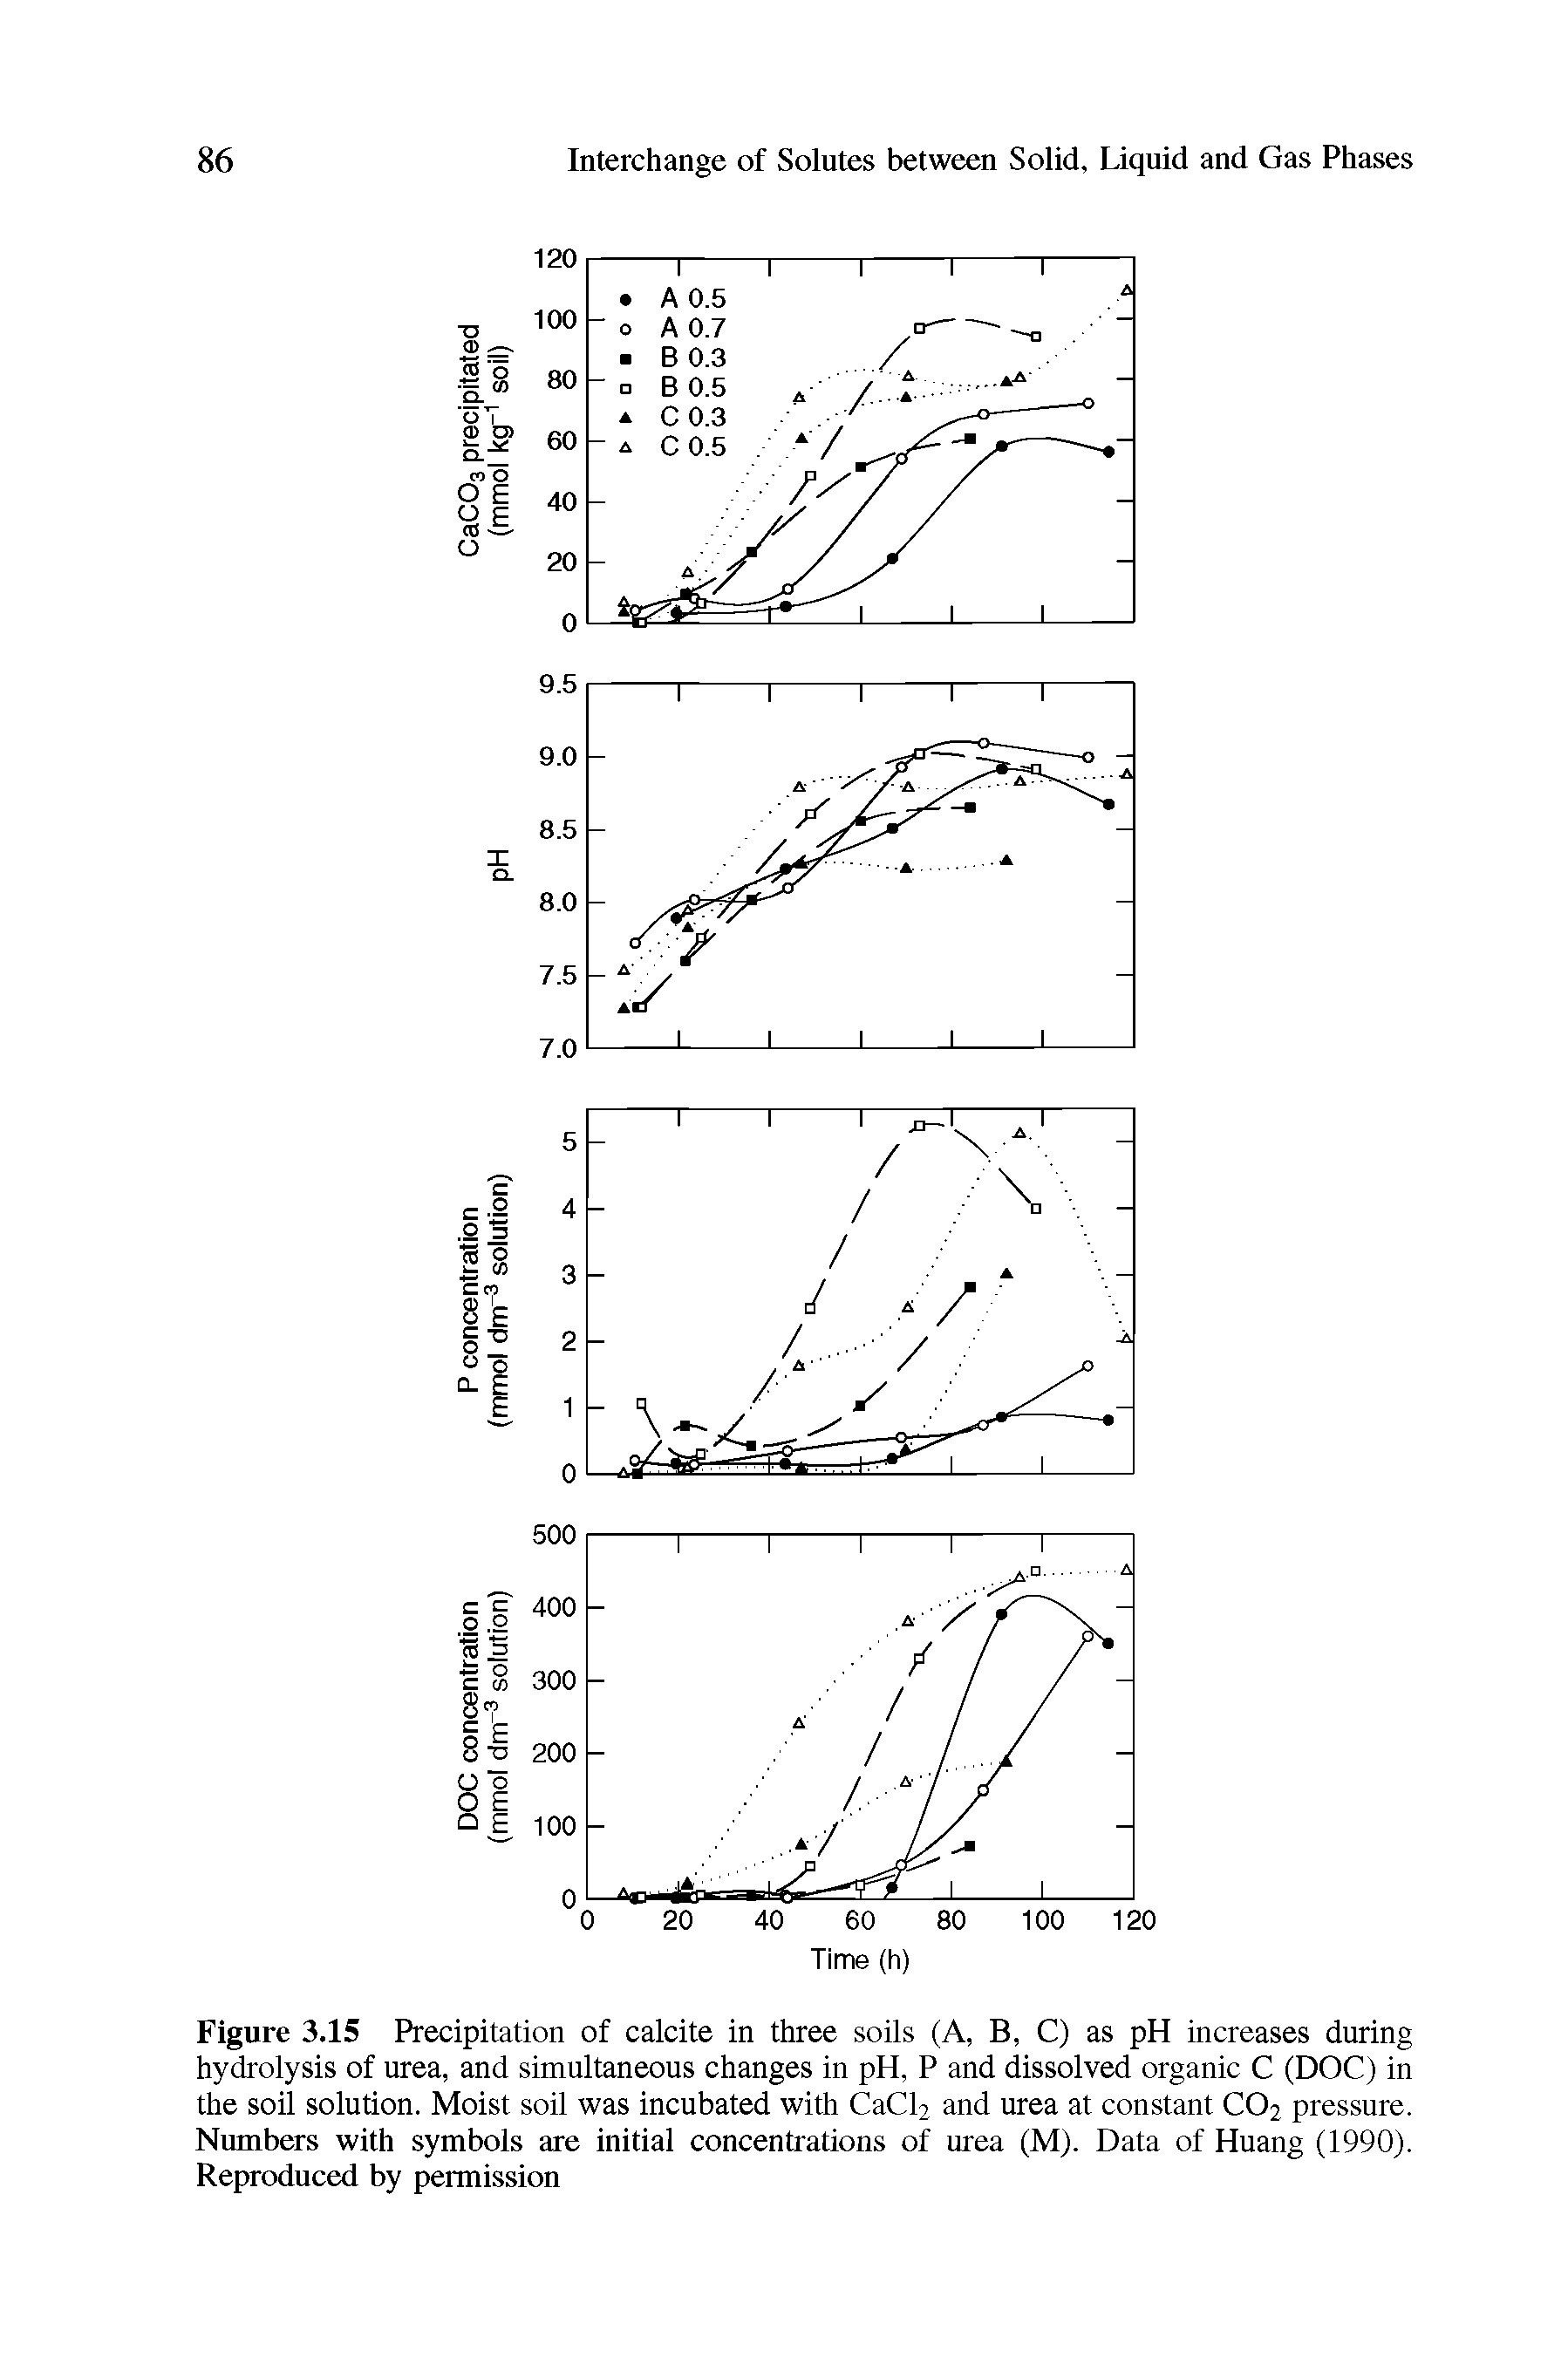 Figure 3.15 Precipitation of calcite in three soils (A, B, C) as pH increases during hydrolysis of urea, and simultaneous changes in pH, P and dissolved organic C (DOC) in the soil solution. Moist soil was incubated with CaCl2 and urea at constant CO2 pressure. Numbers with symbols are initial concentrations of urea (M). Data of Huang (1990). Reproduced by permission...